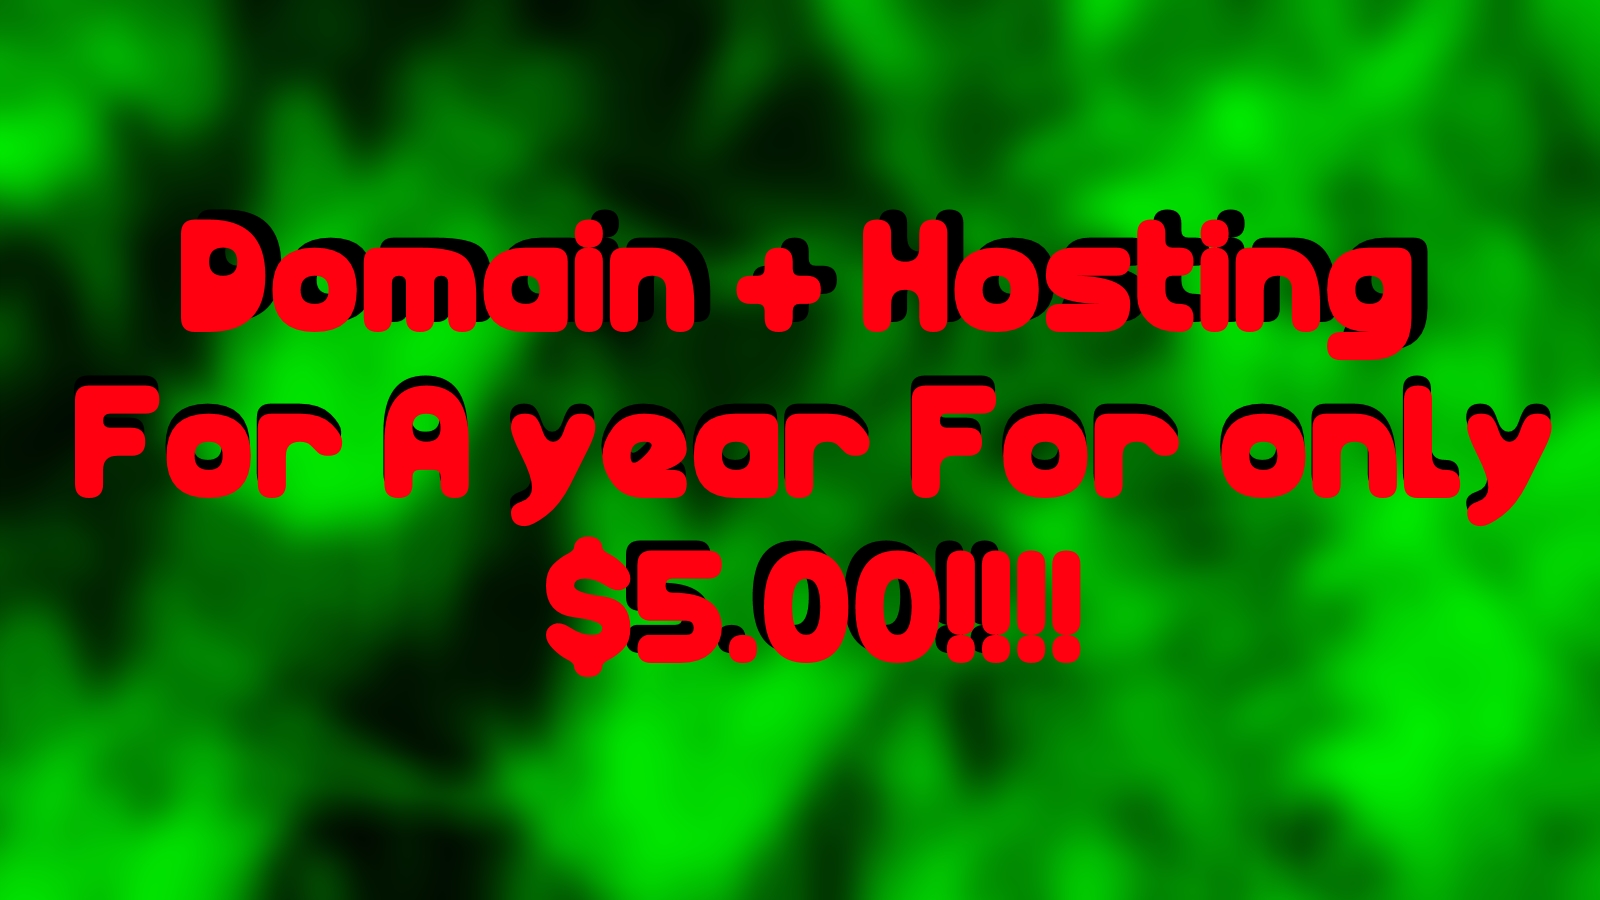 Get You A domain and dedicated hosting for a year!